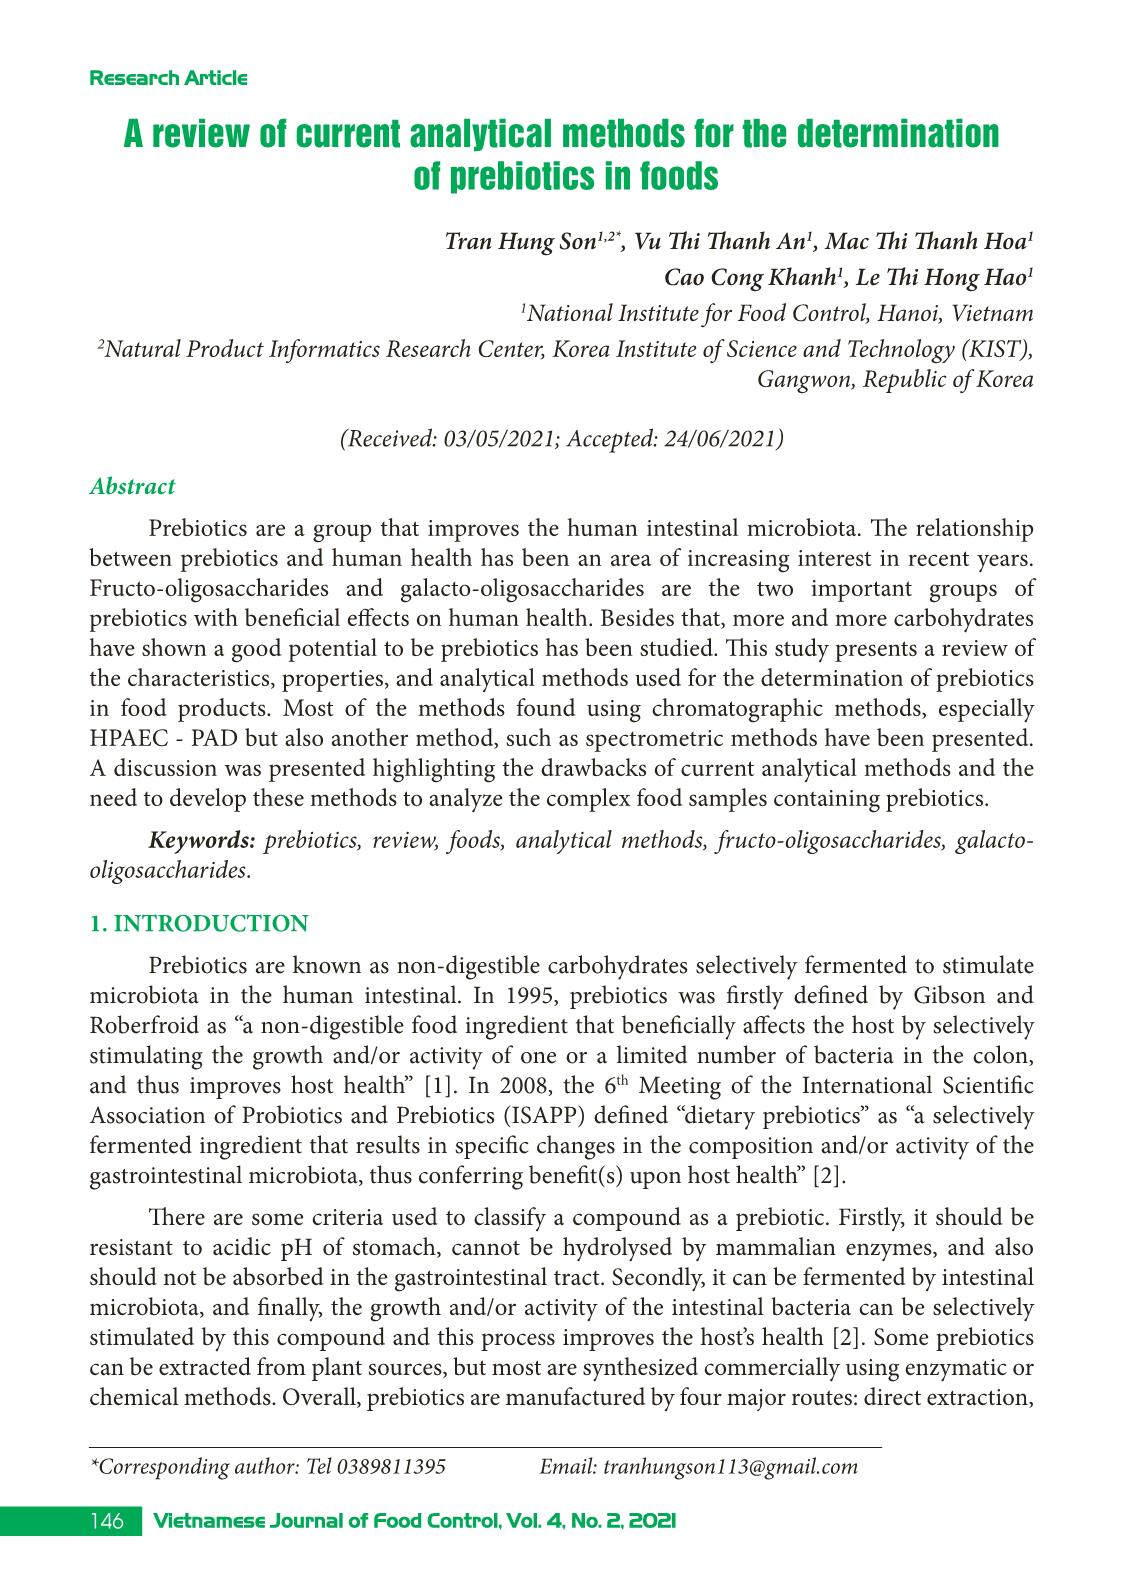 A review of current analytical methods for the determination of prebiotics in foods trang 1